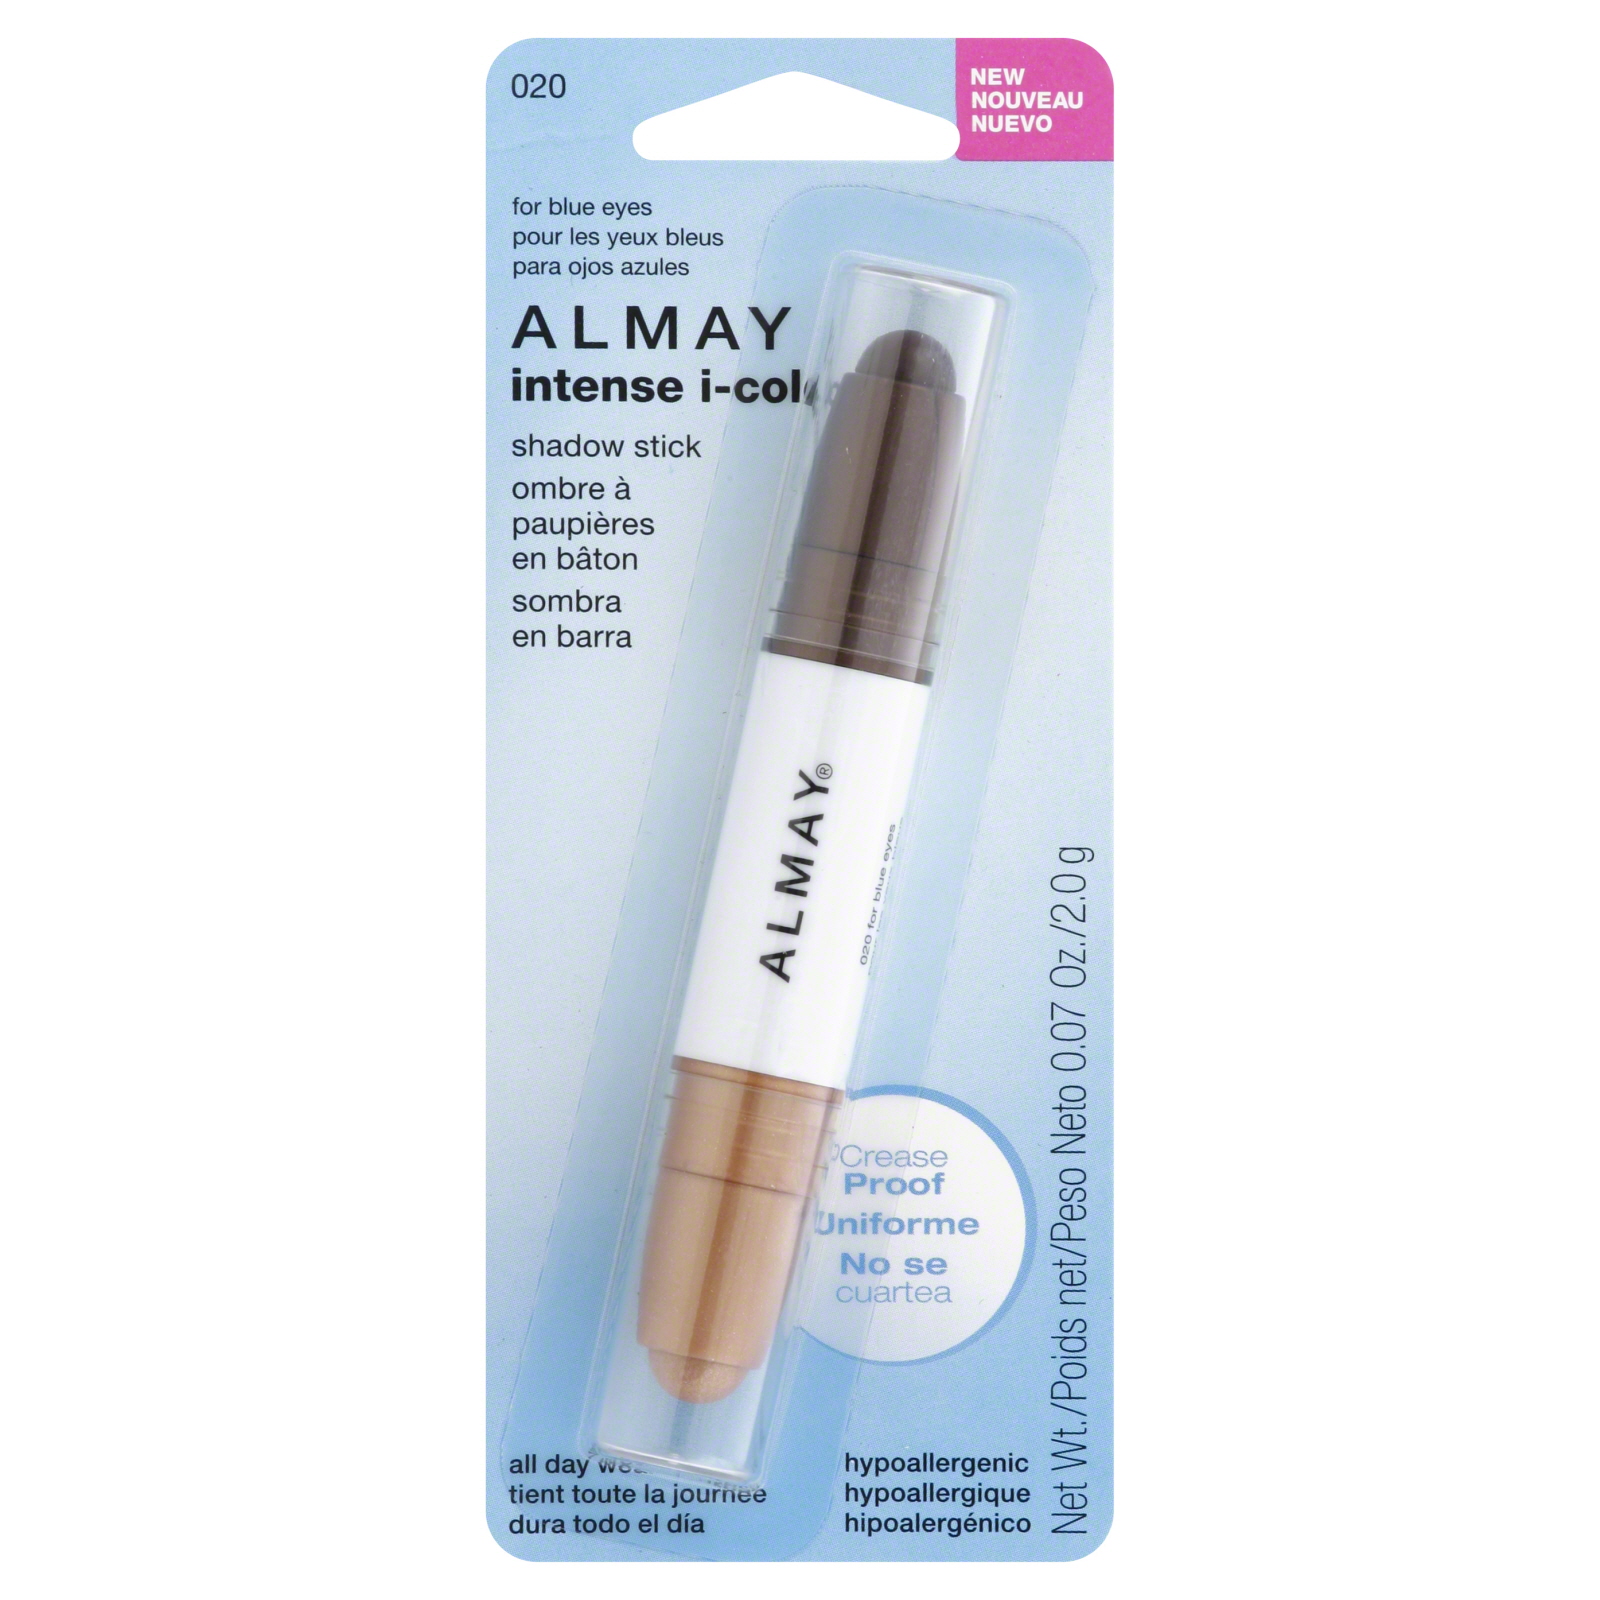 almay intense i-color shadow stick, for blue eyes 020, 0.07